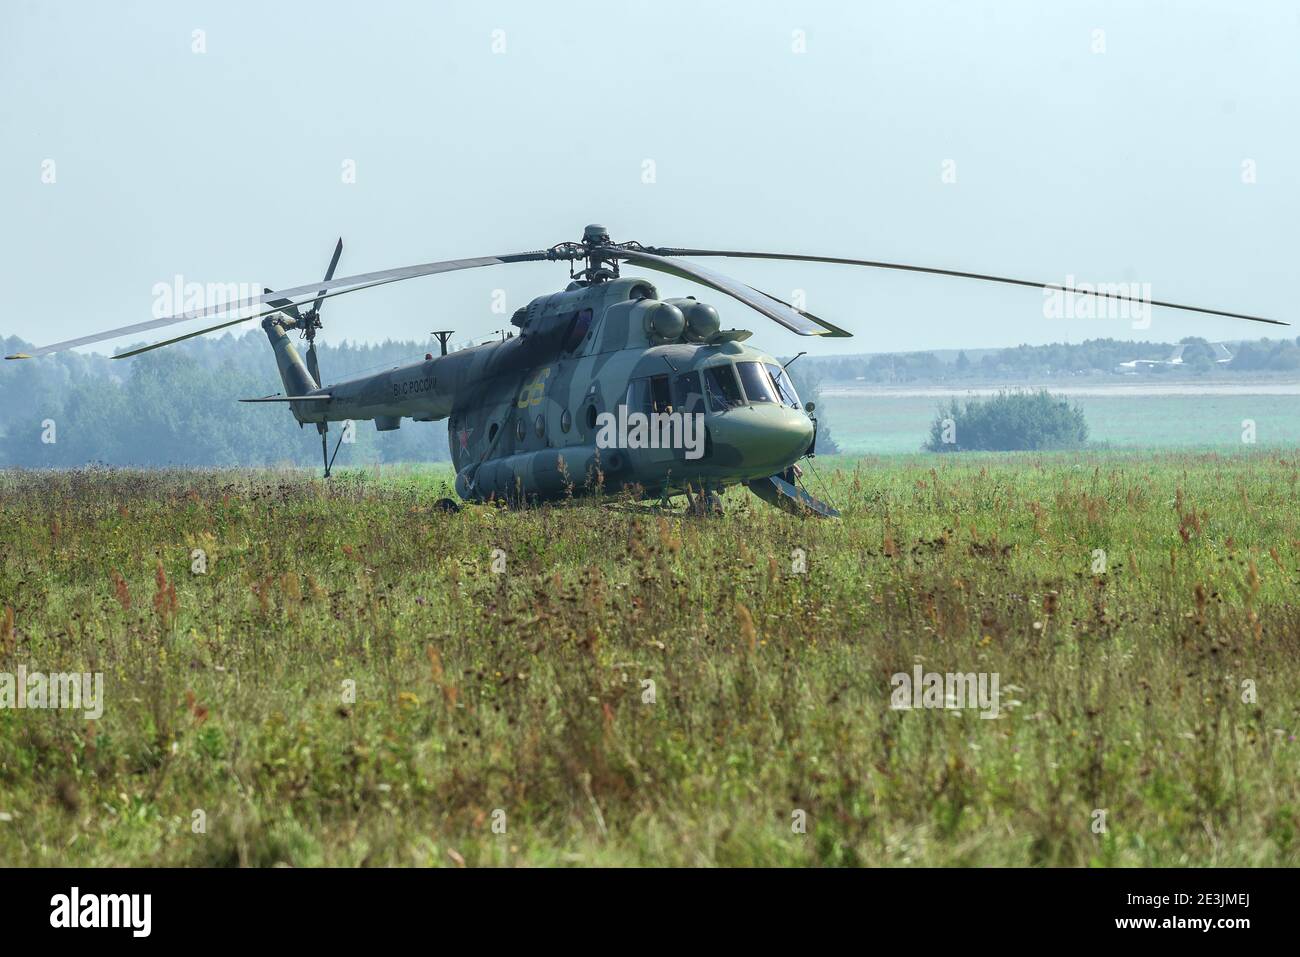 MOSCOW REGION, RUSSIA - AUGUST 30, 2019: Helicopter Mi-8 (RF-04507) Russian Aerospace Forces stands in the field on a summer day Stock Photo